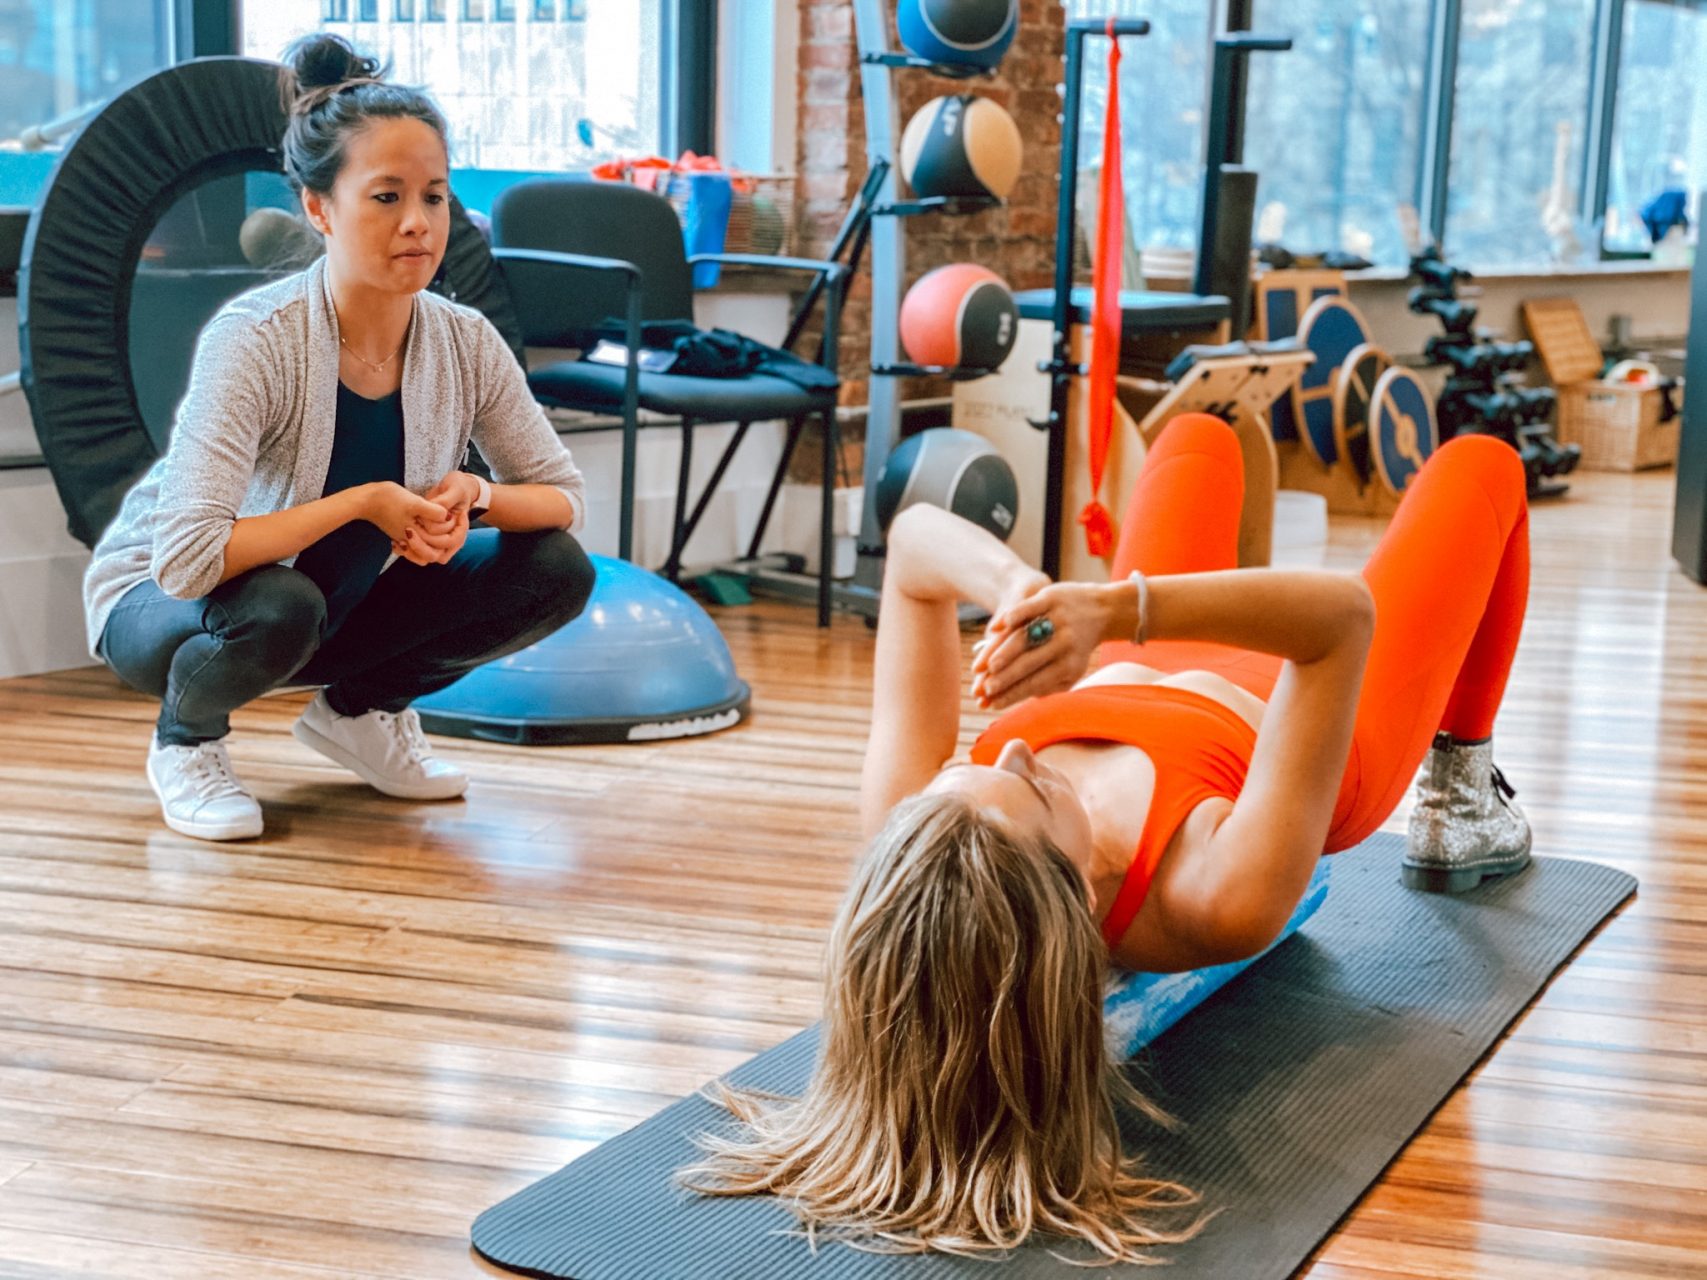 Dr. Sarah Rodriguez, DPT, Physical Therapist, monitors a patient during a Physical Therapy session at Physio Logic NYC's Brooklyn, NY location.